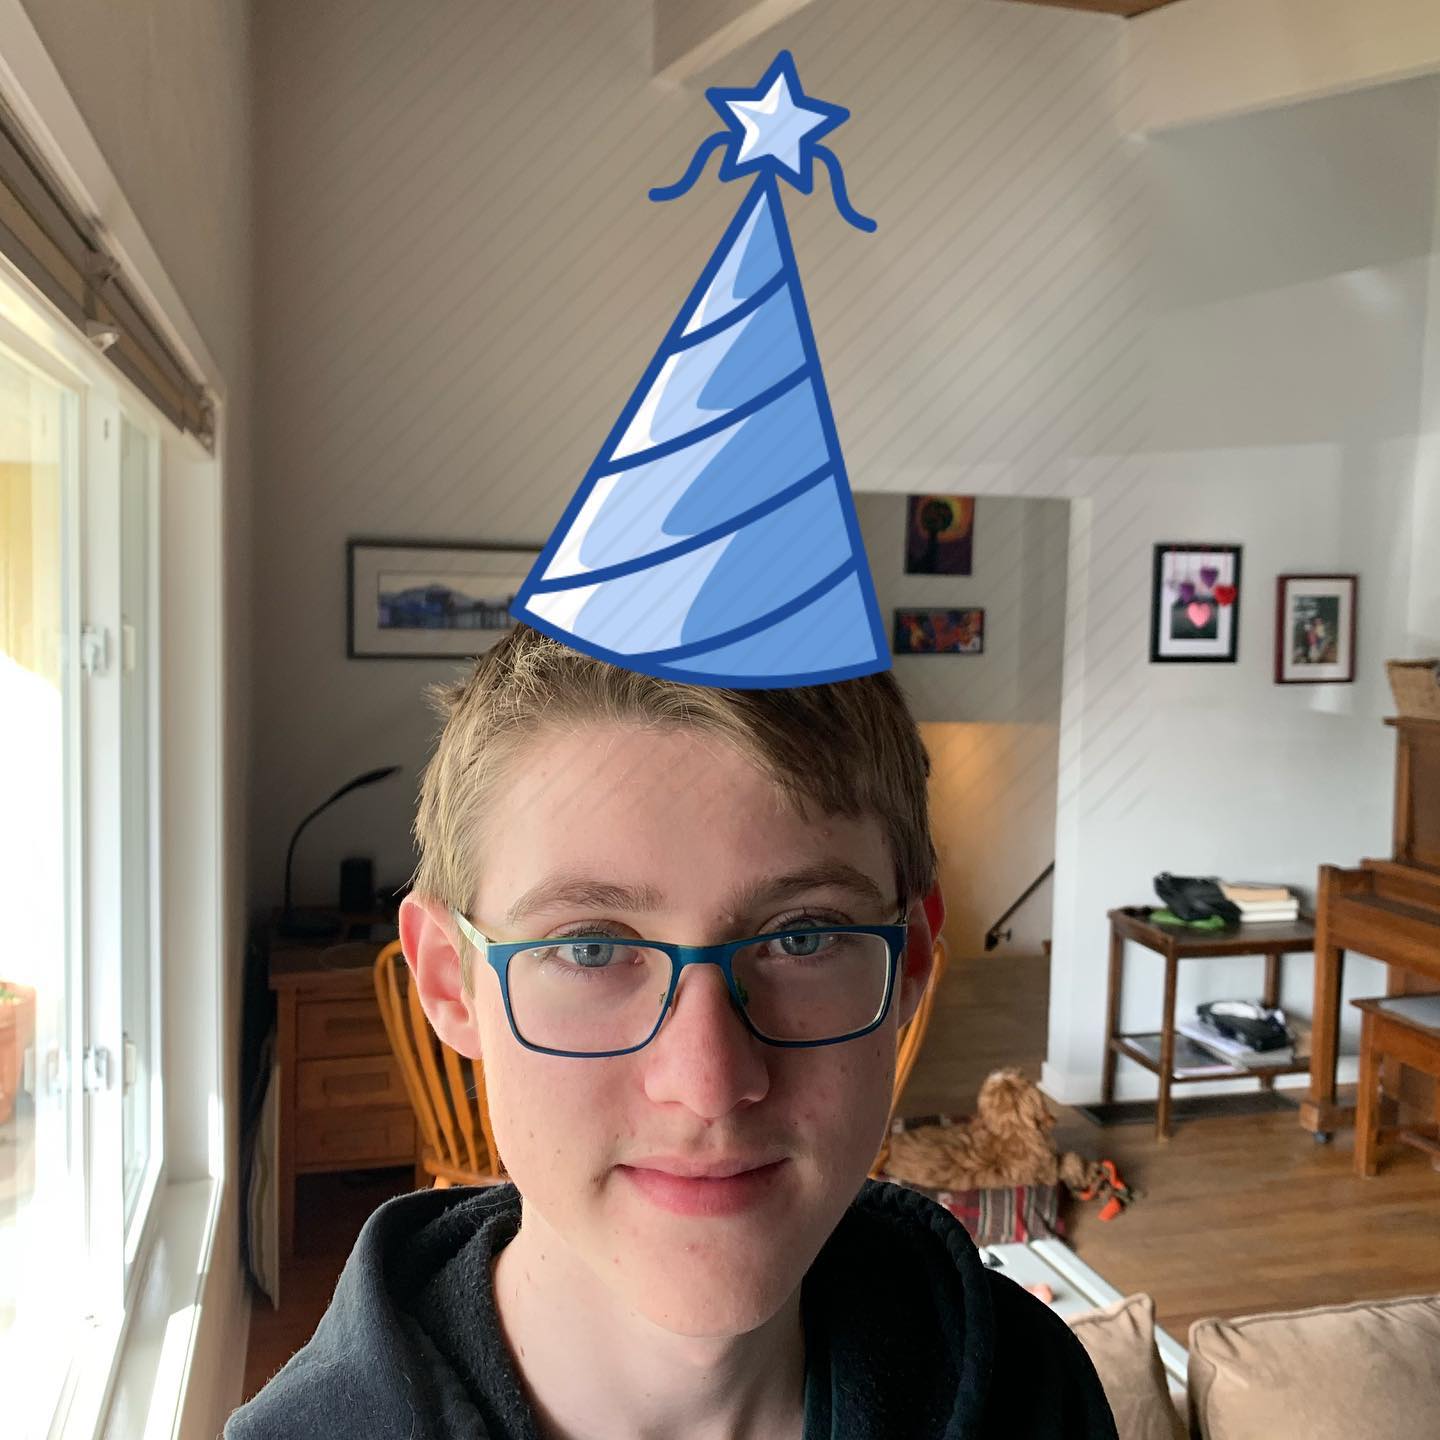 How time flies. 15 years ago E joined this world and our lives. It’s been quite an adventures since then. Love you lots. #happybirrhday #turned15